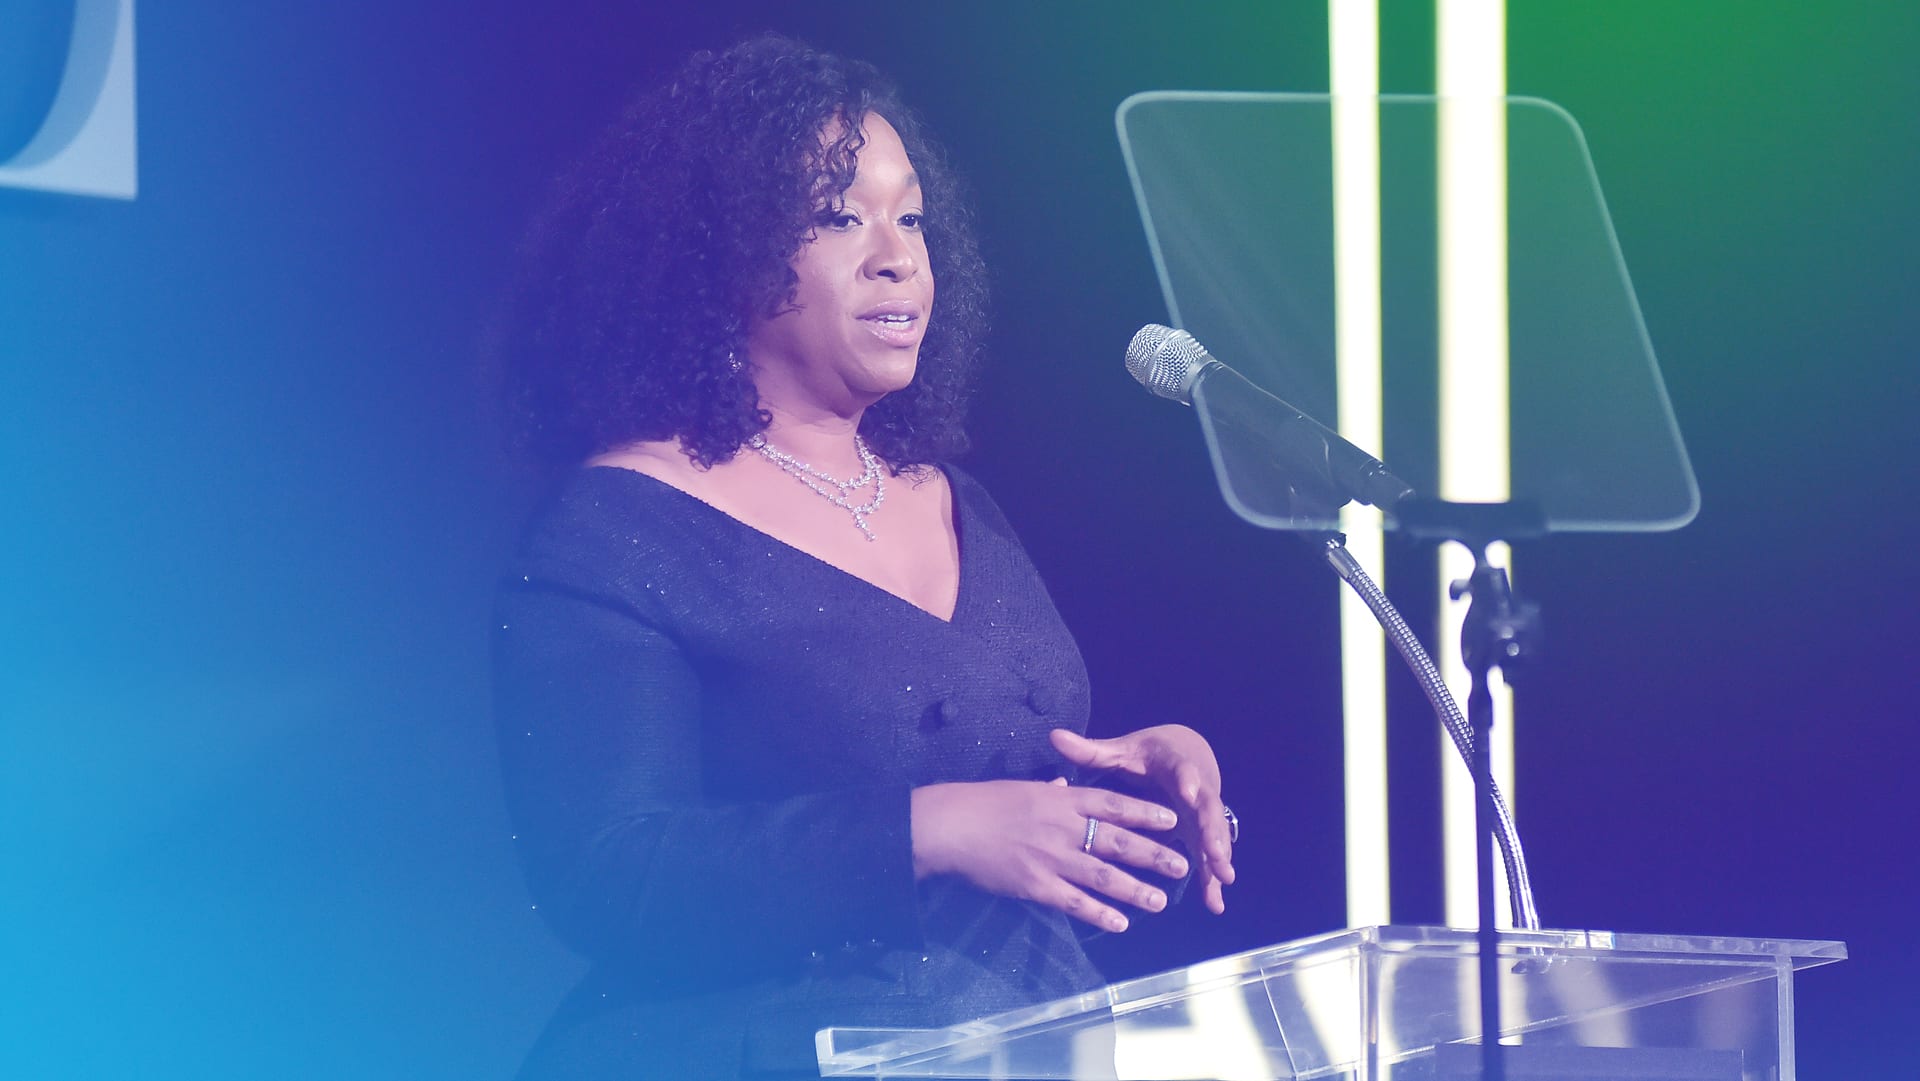 Shonda Rhimes, “highest-paid showrunner” in TV, wants women to demand what they deserve